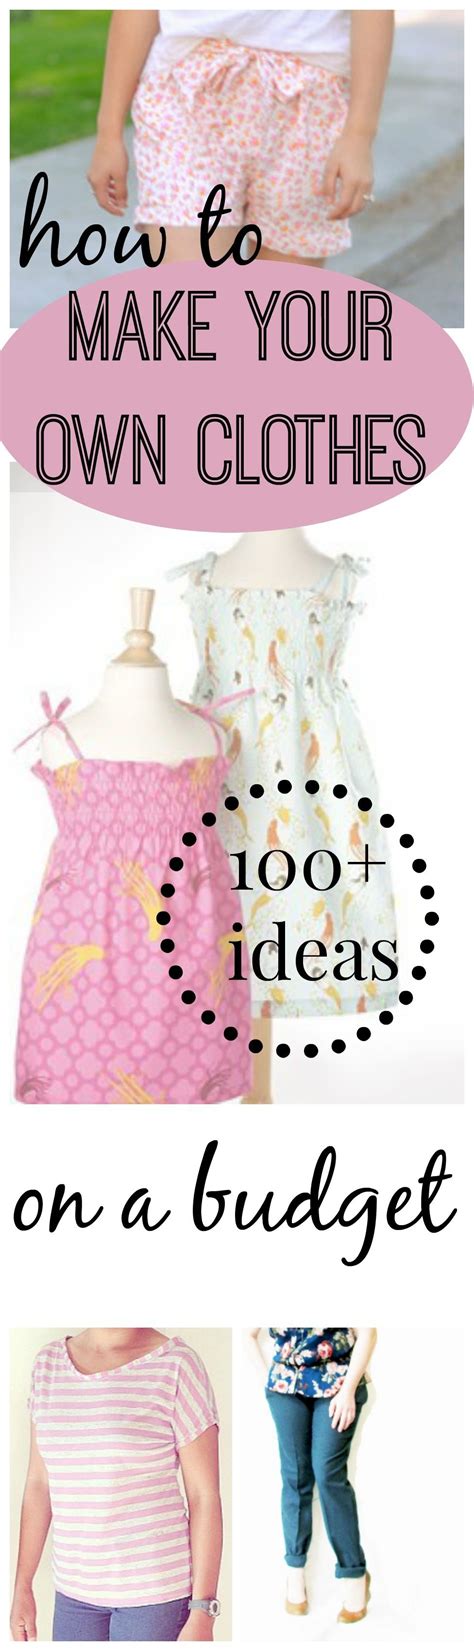 How To Make Clothes 500 Tutorials For Making Your Own Clothes Diy